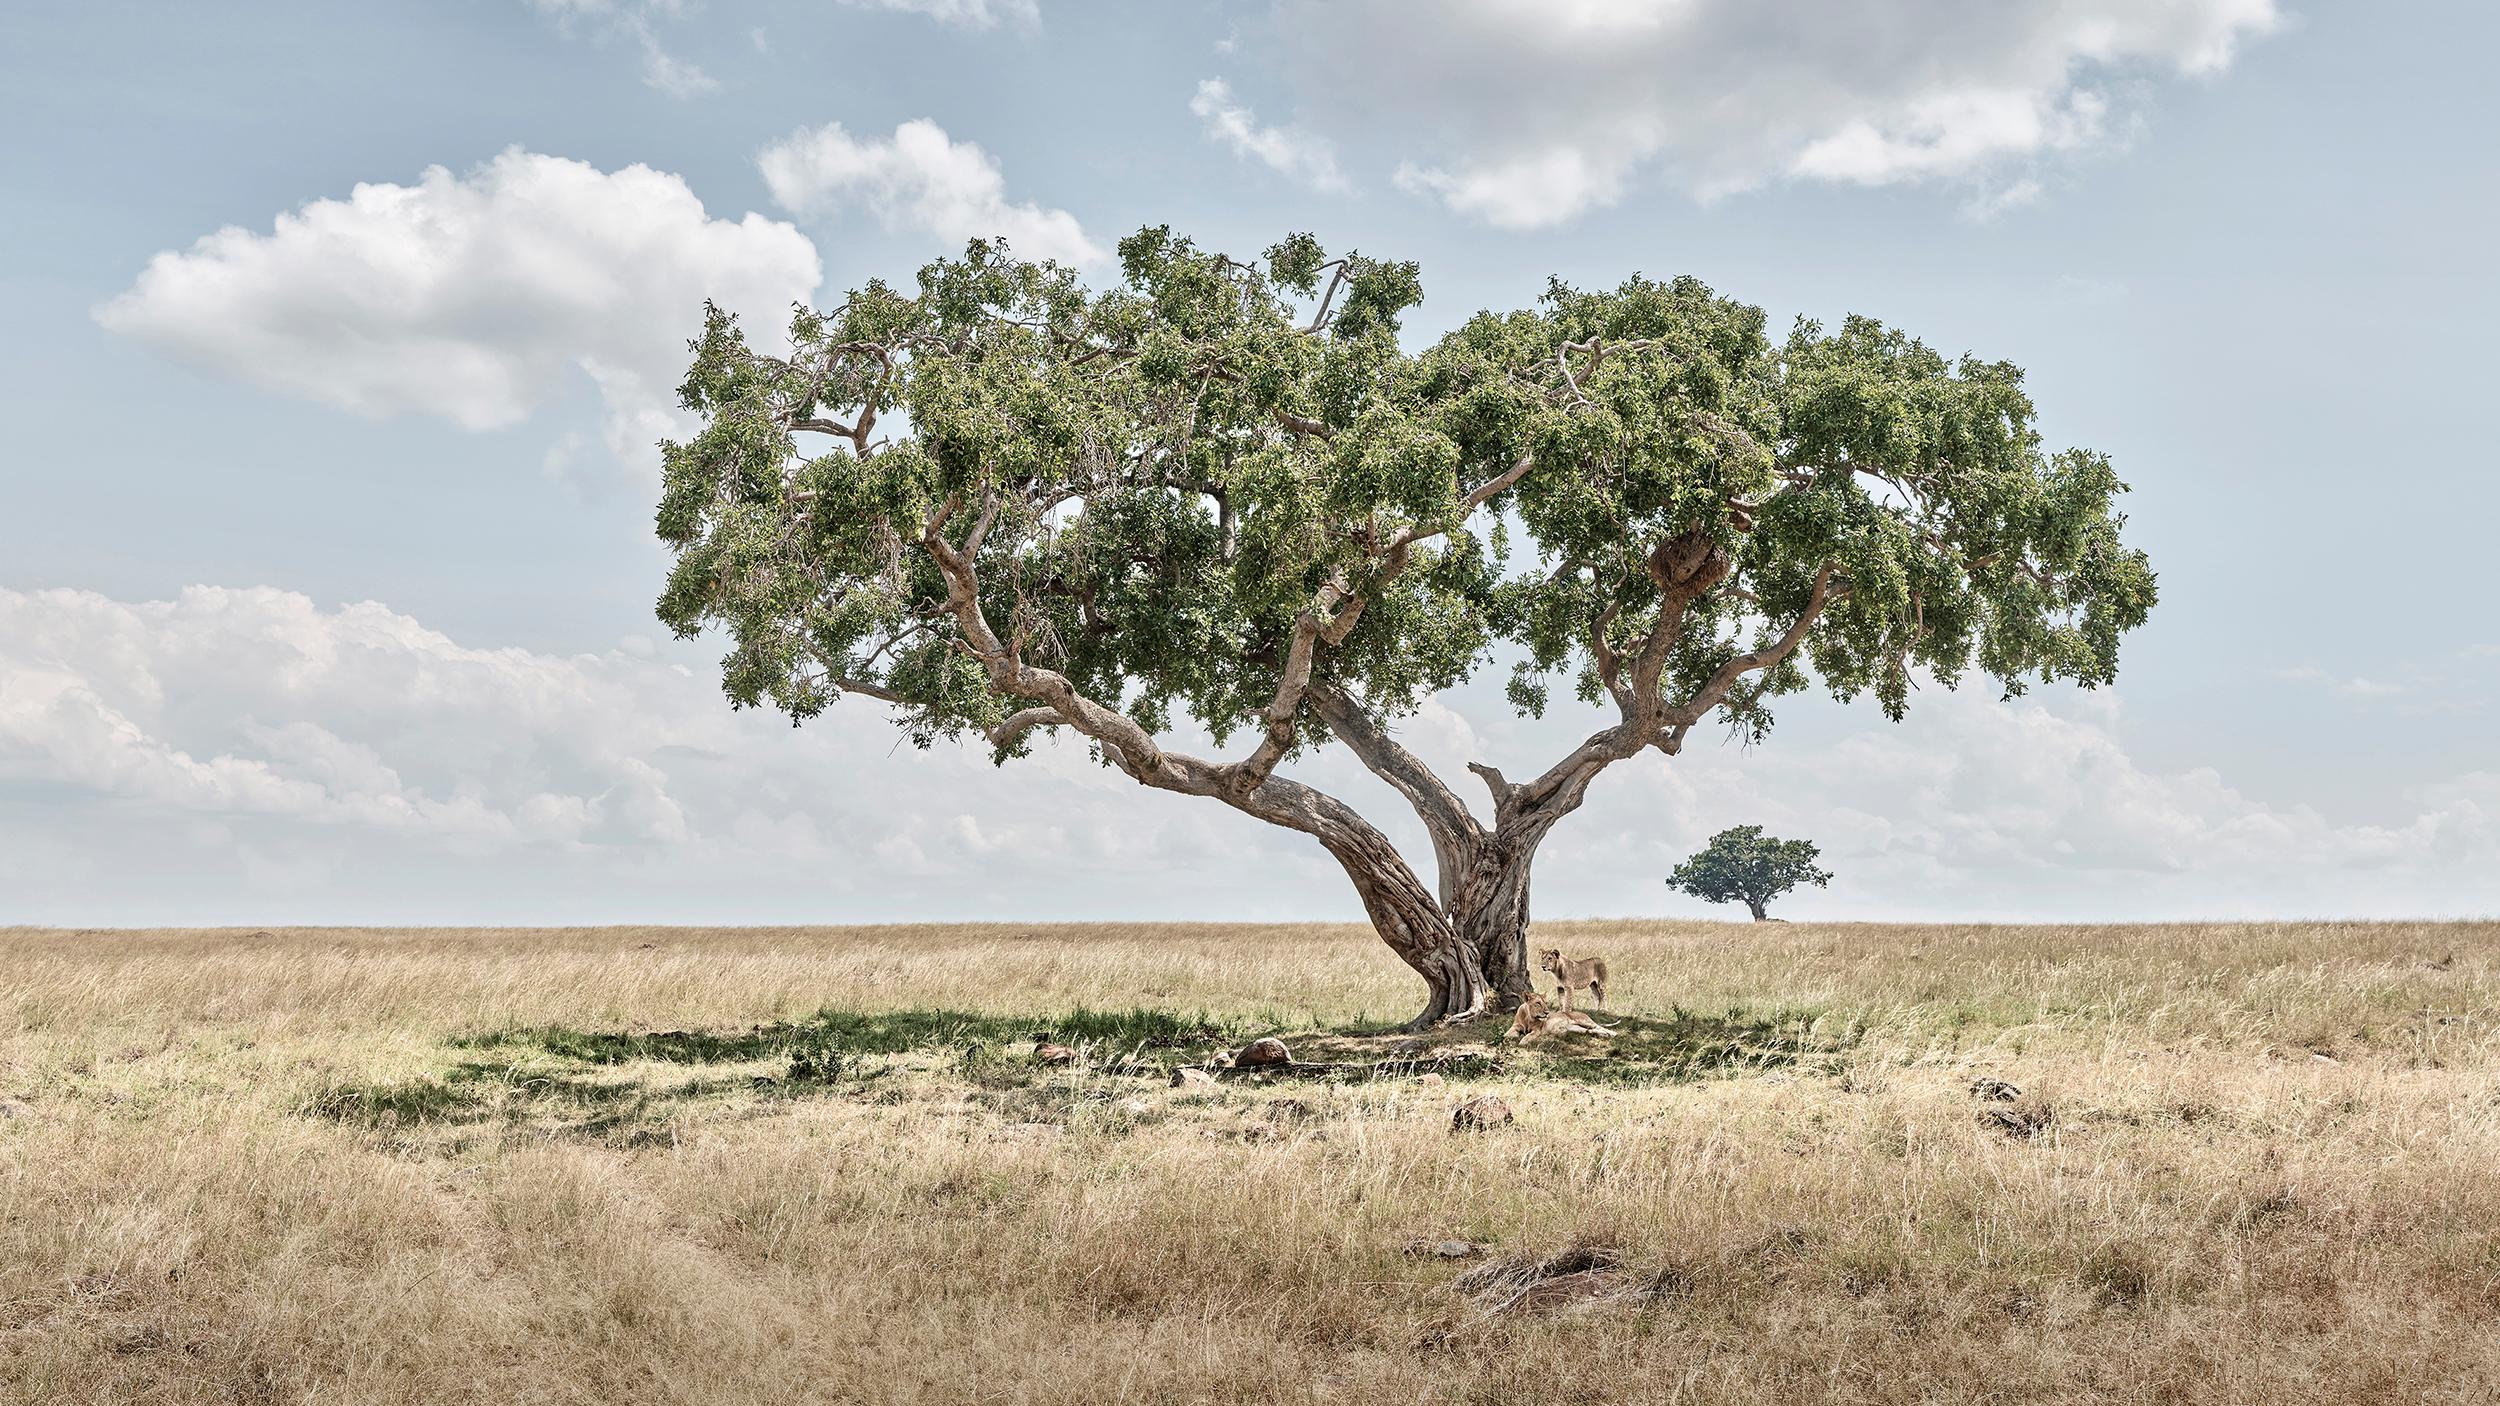 Title: Lion Cubs Under Acacia Tree, Maasai Mara, Kenya

All available sizes & editions for each size of this photograph:
27” x 48" Edition of 7
37” x 66" Edition of 10
48” x 85” Edition of 5

This project Before Ever After was less about documenting